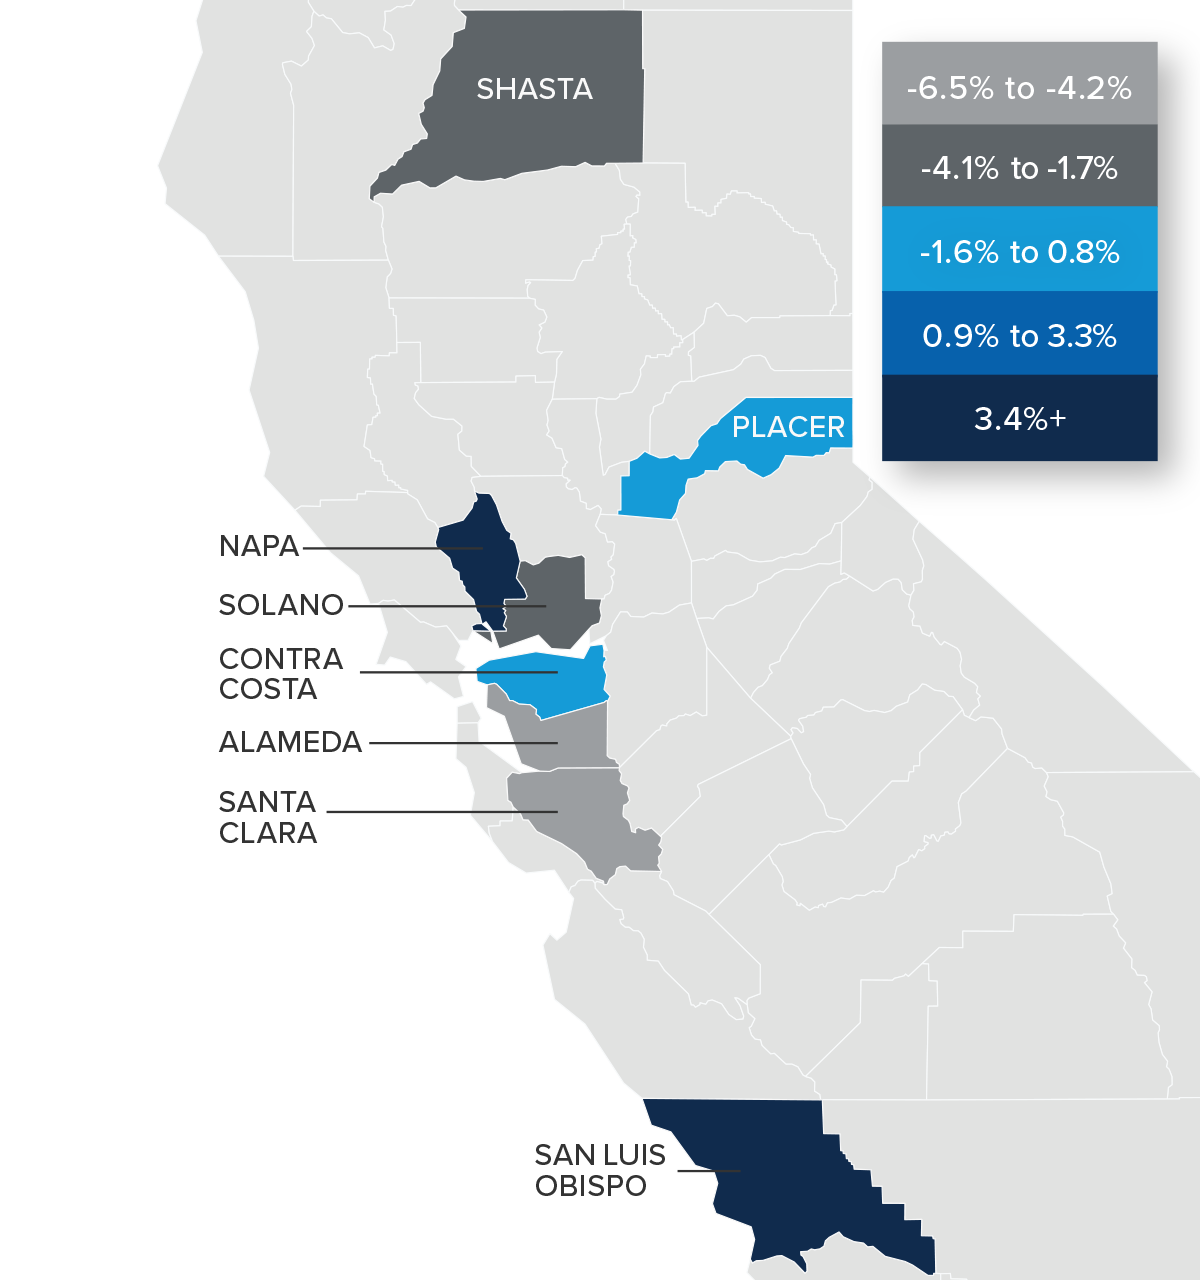 A map showing the real estate home prices percentage changes for various counties in Northern California. Different colors correspond to different tiers of percentage change. Alameda and Santa Clara have a percentage change in the -6.5% to -4.2% range, Shasta and Solano are in the -4.1% to -1.7% change range, Contra Costa and Placer are in the -1.6% to 0.8% range, and Napa and San Luis Obispo are in the 3.4%+ change range.